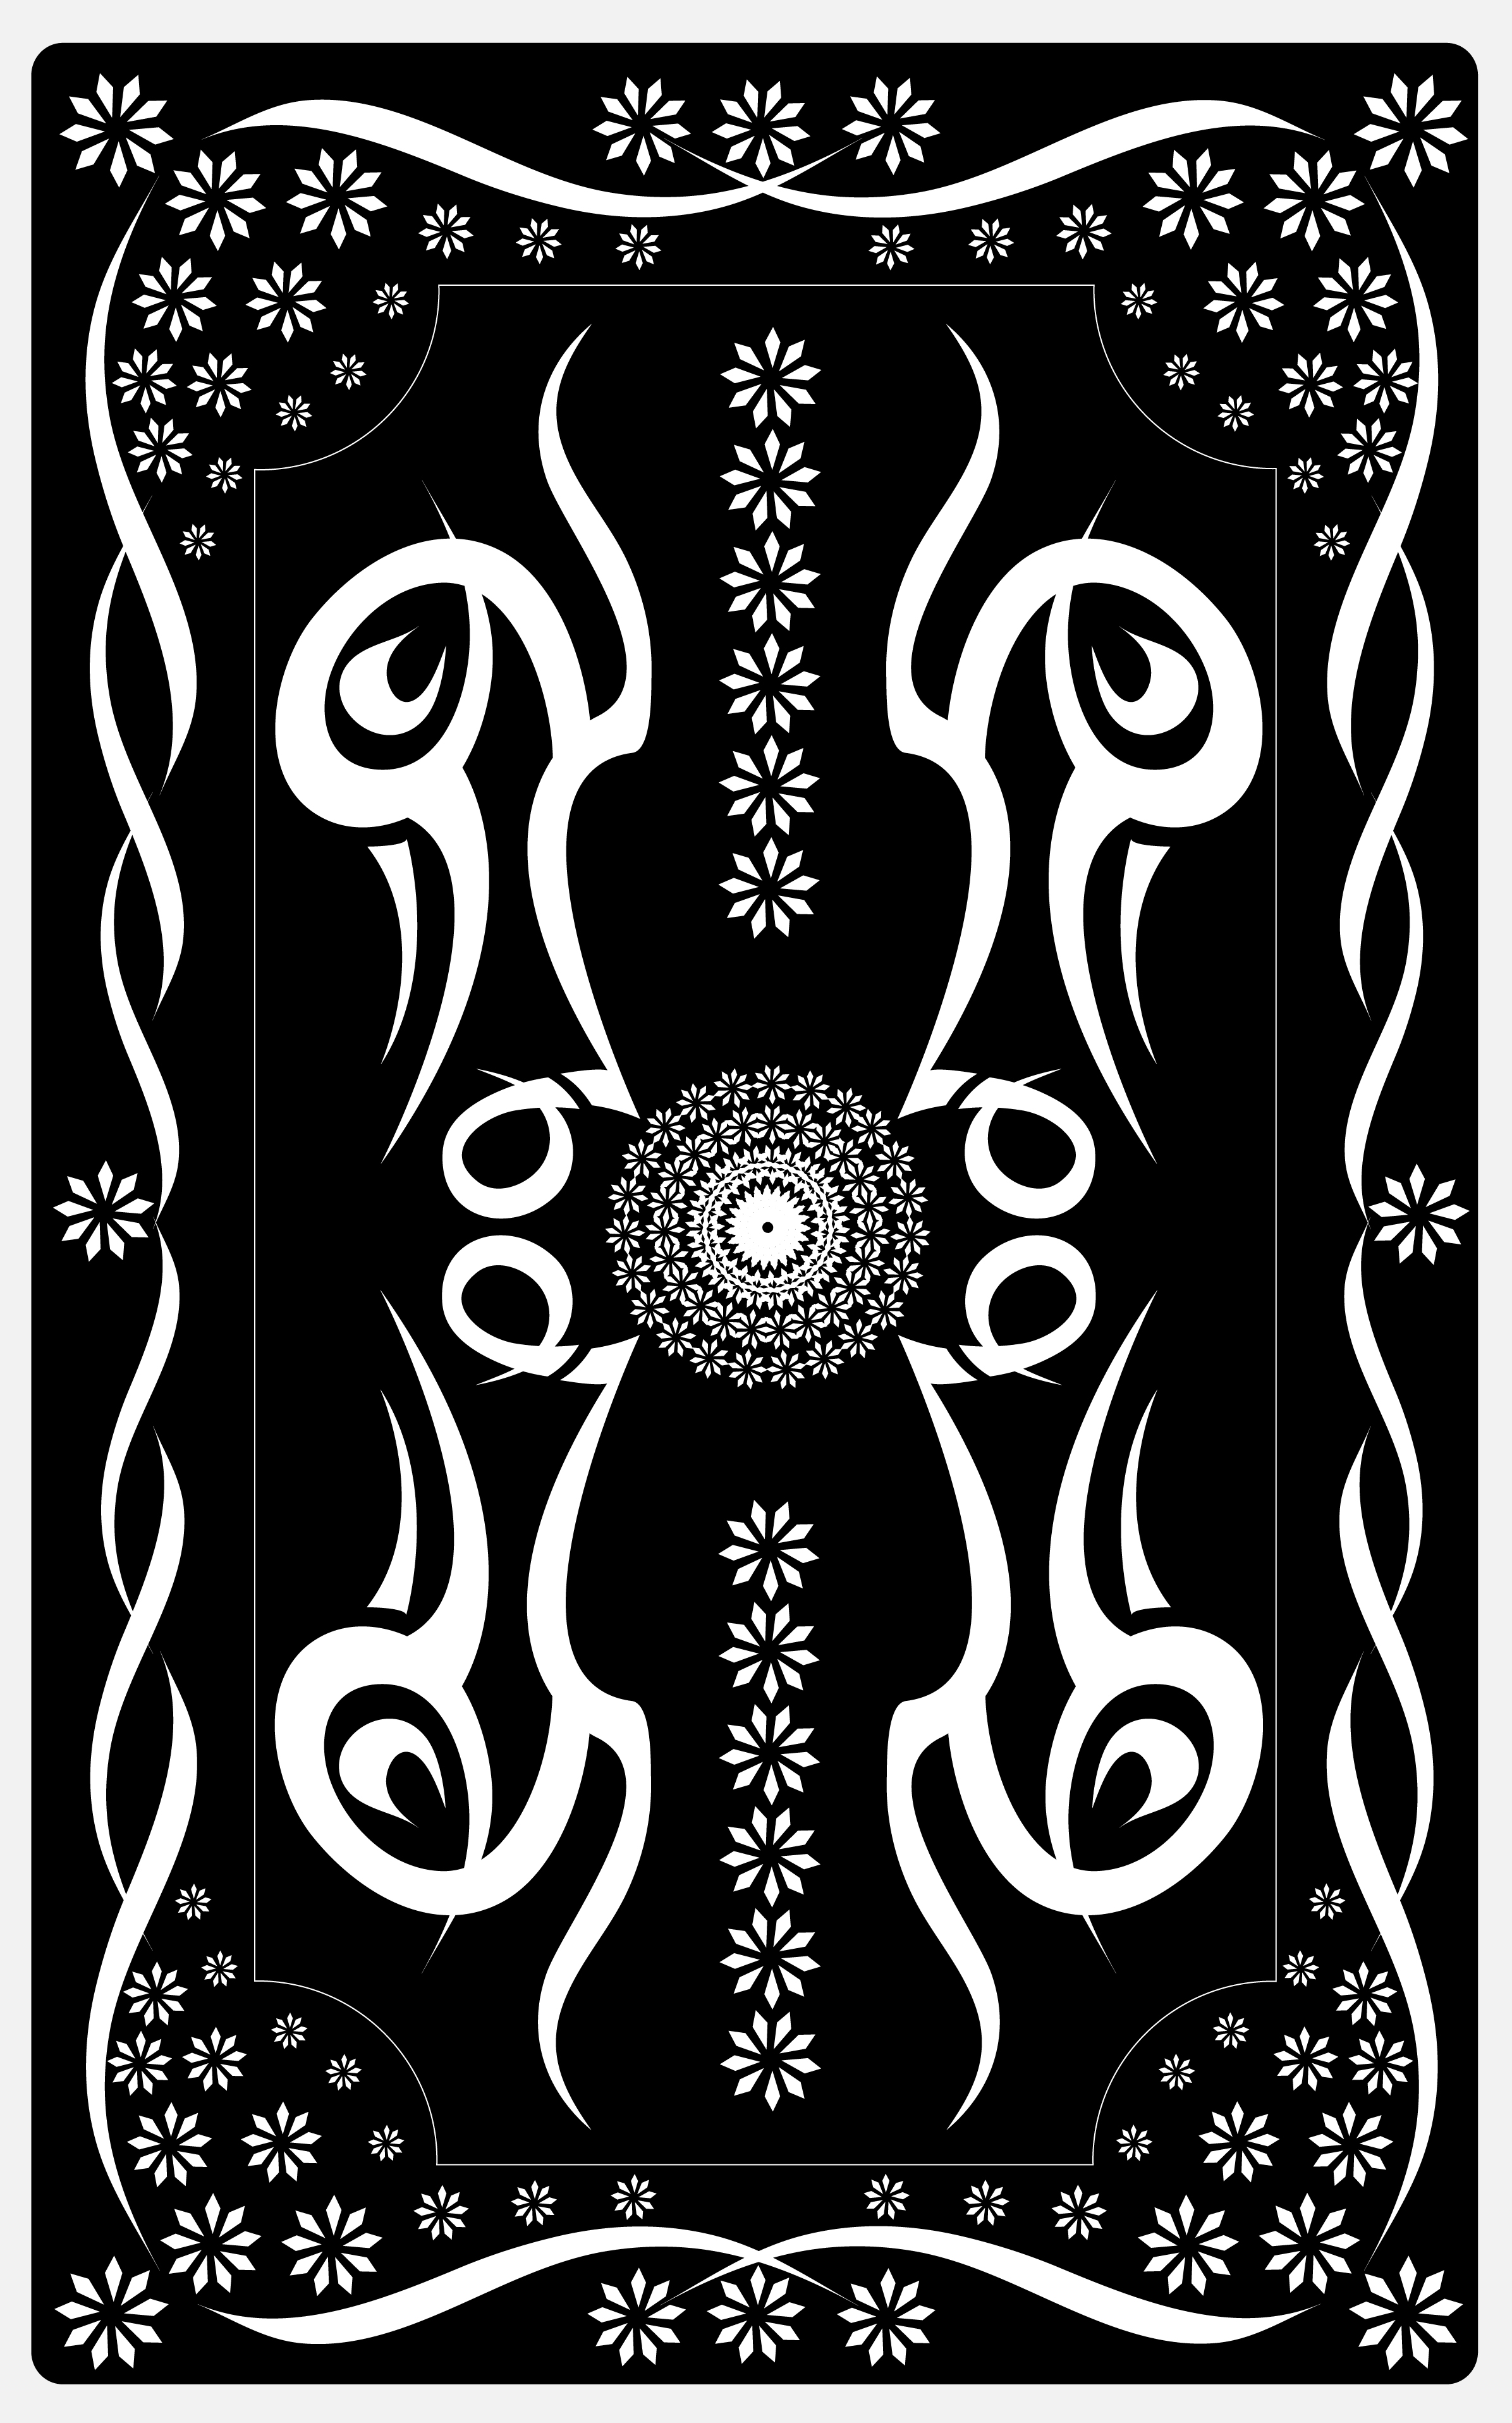 playing card back side 535774 - Download Free Vectors, Clipart Graphics